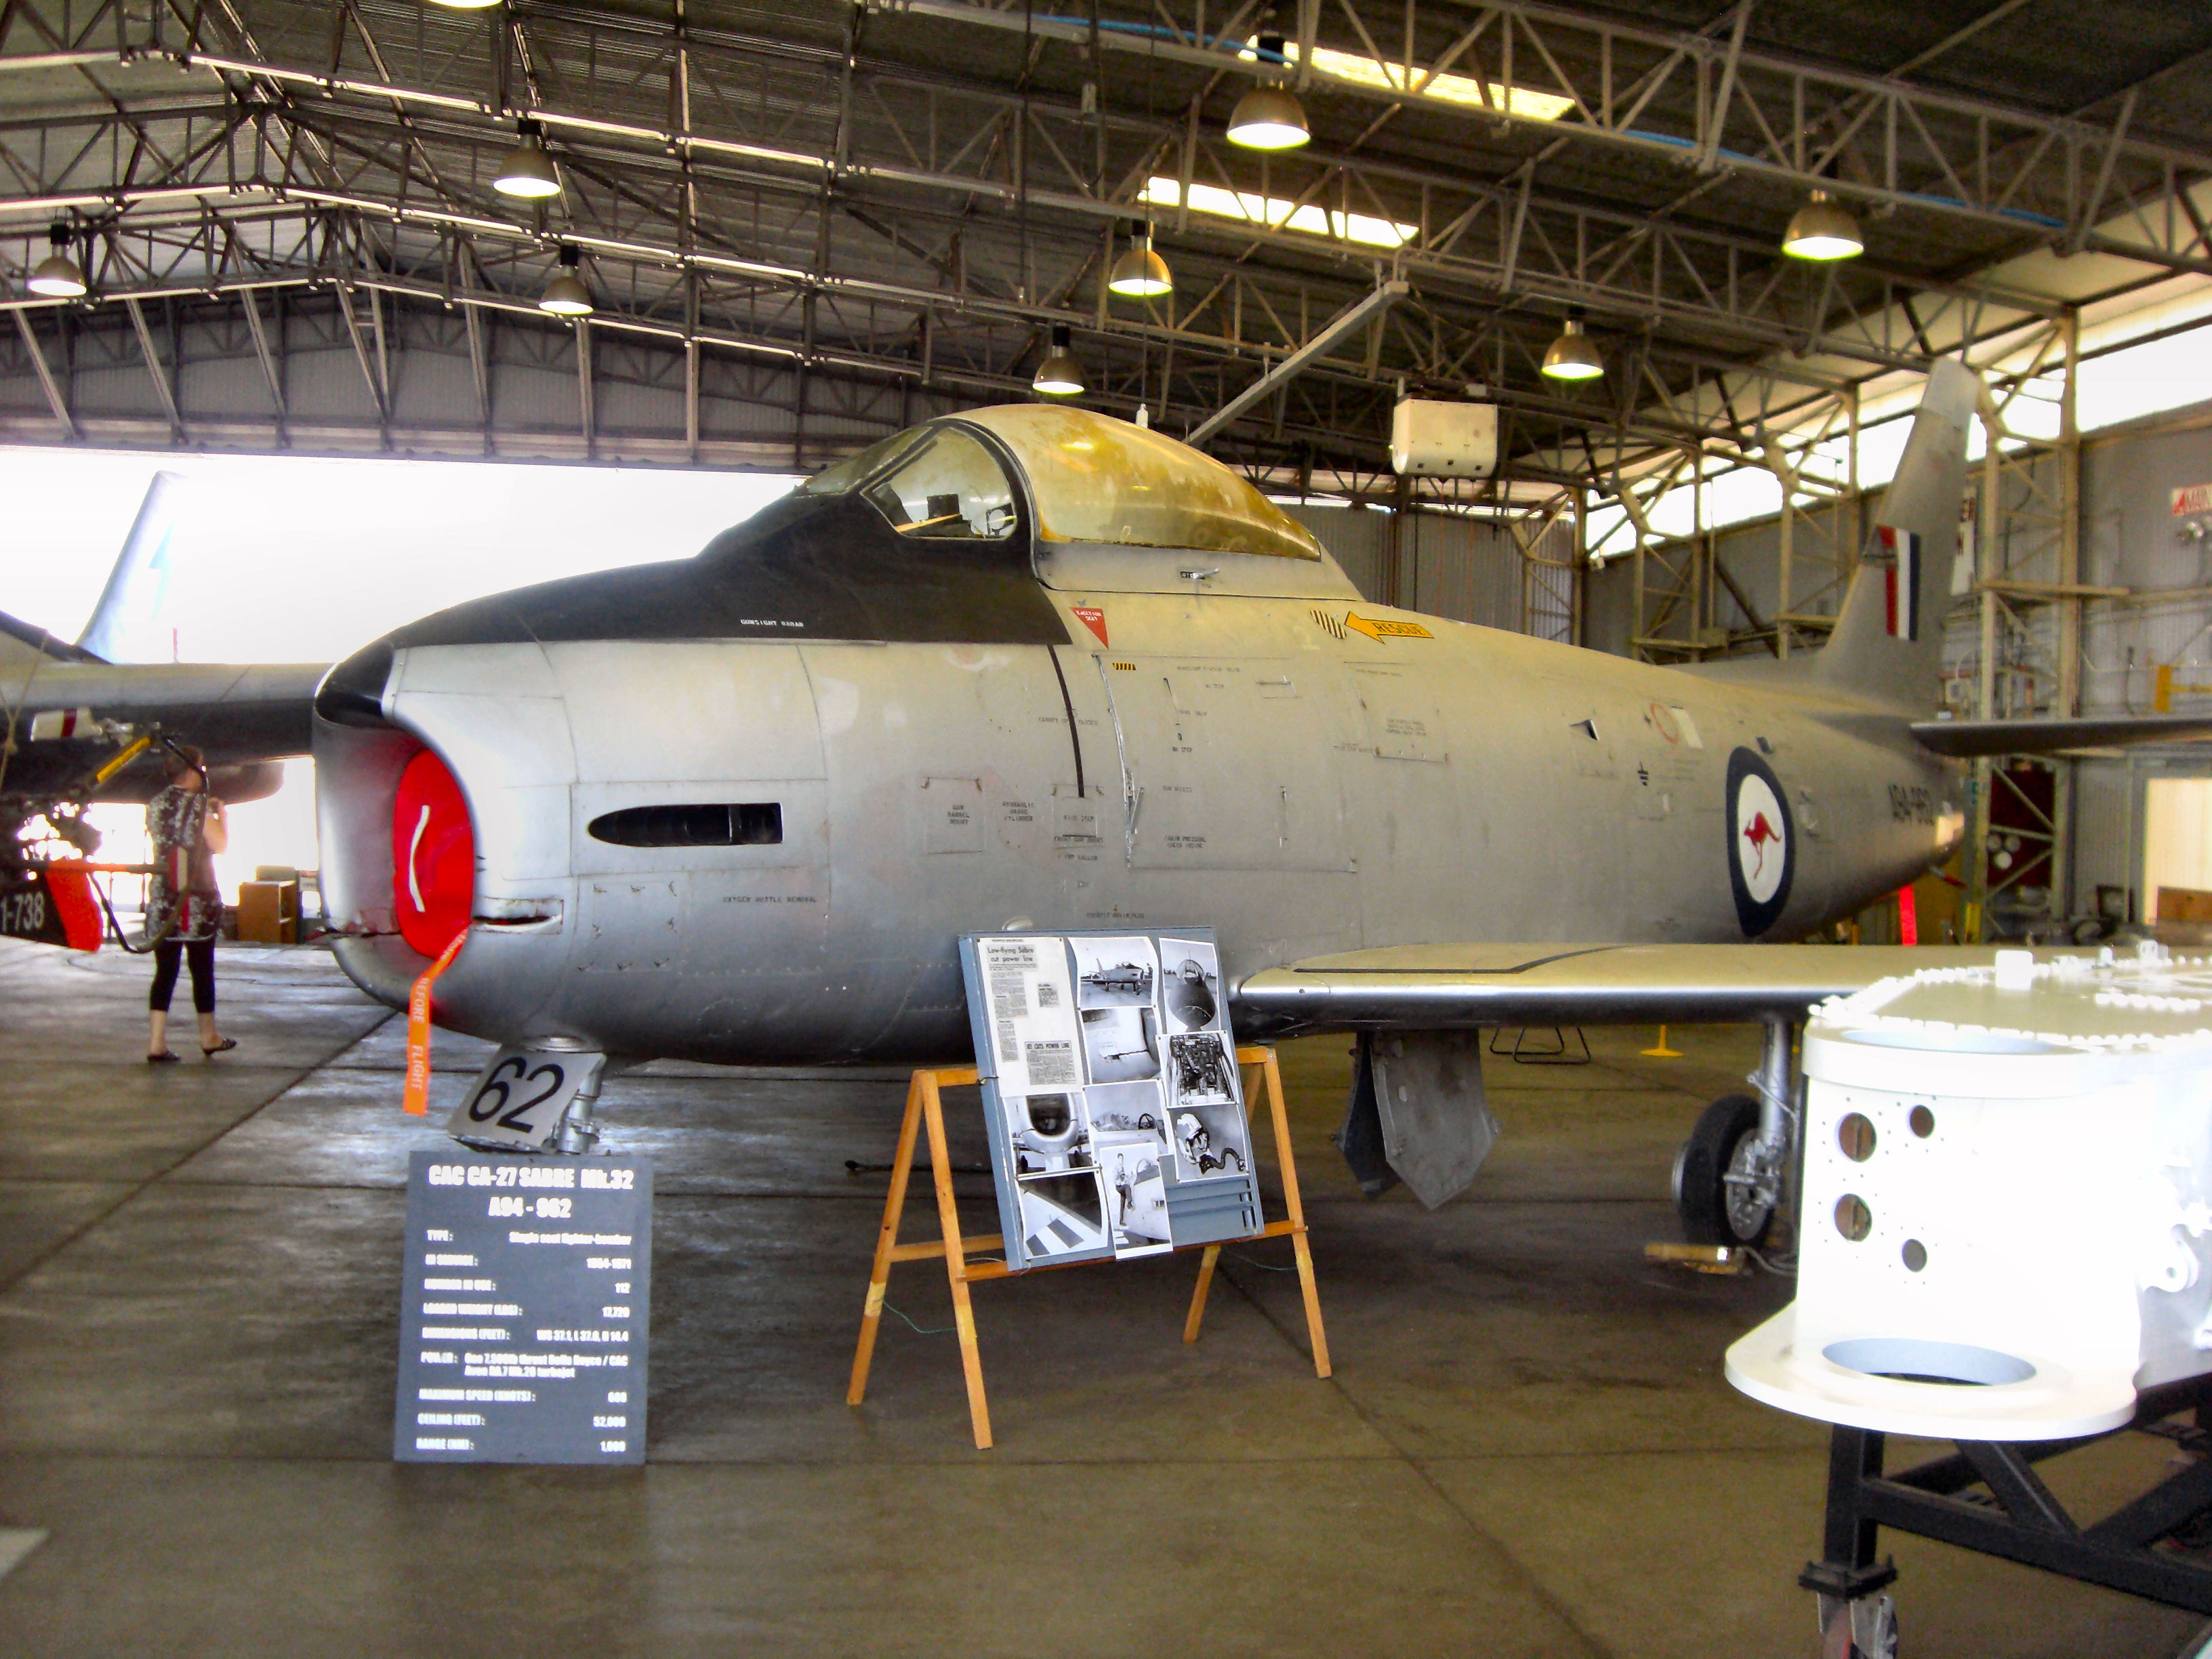 A94-962 on display at Amberley